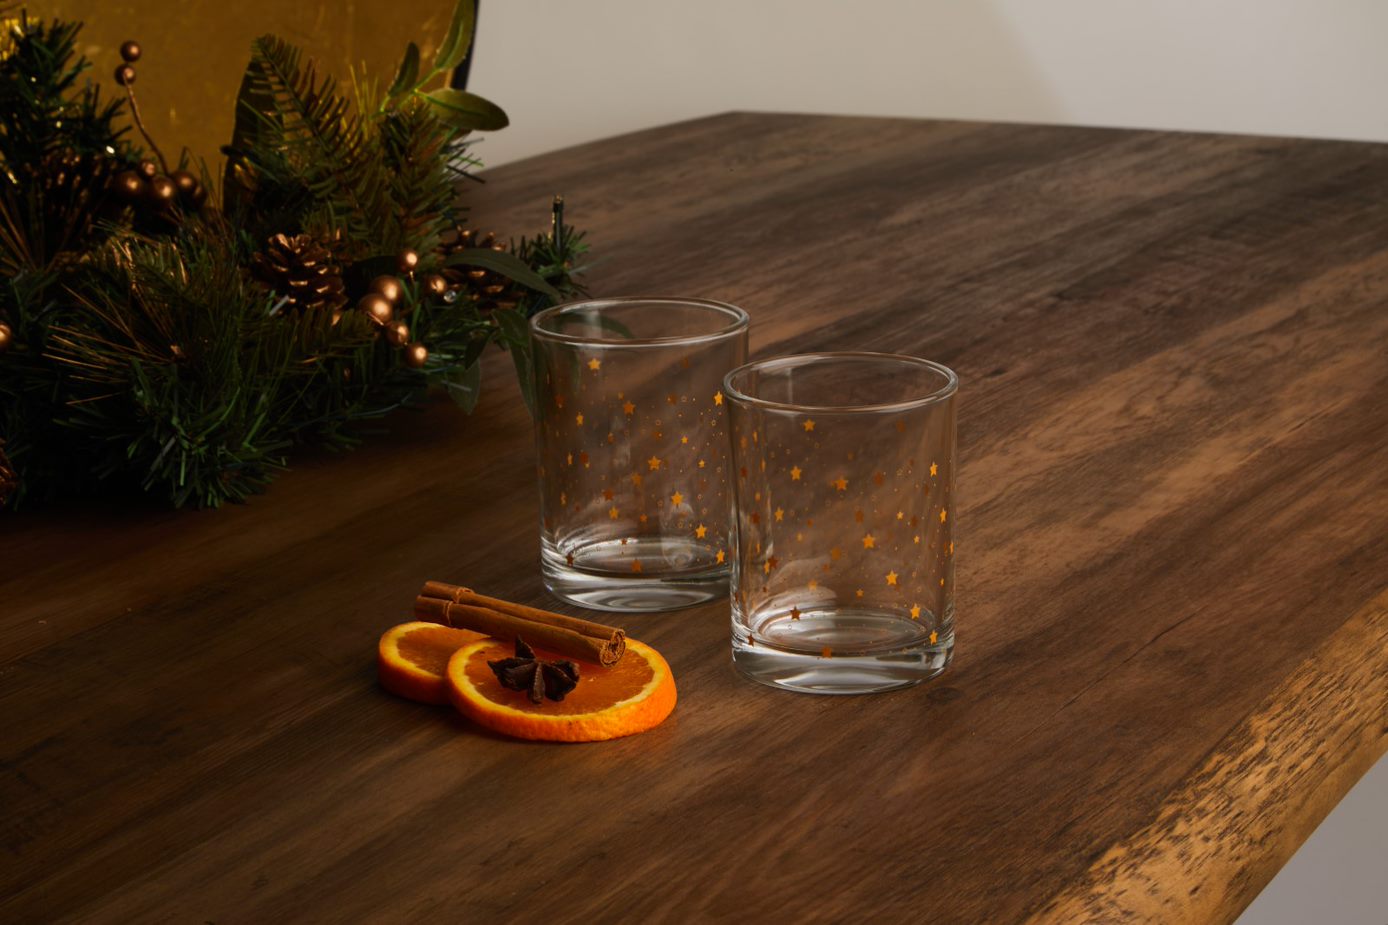 Aldi's Novelty Tumblers (Straight with gold stars)